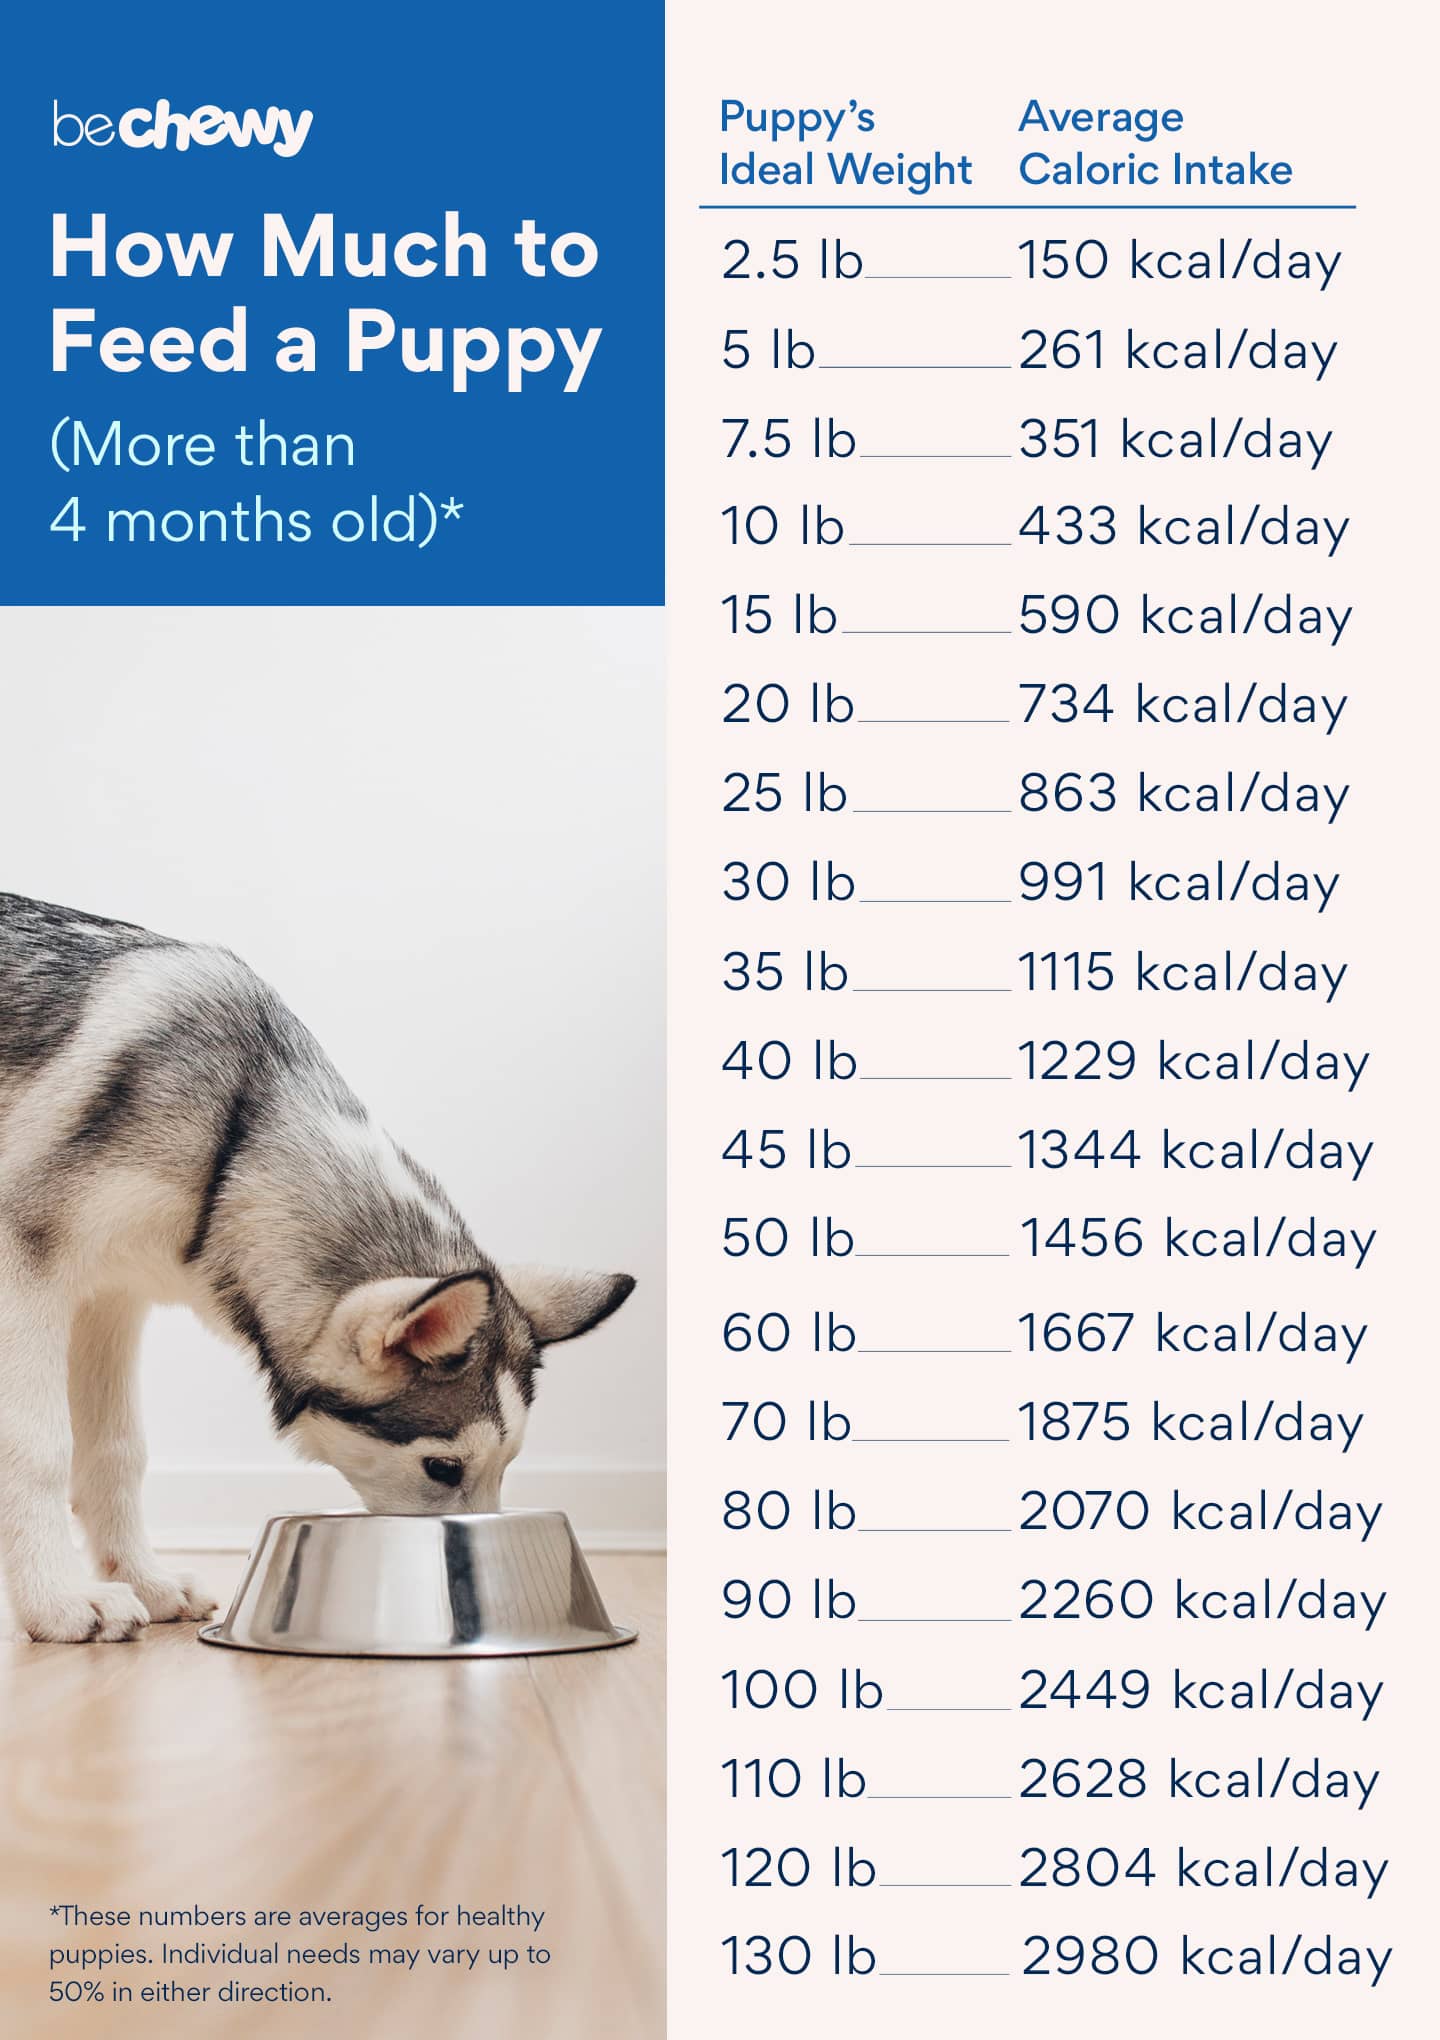 Puppy Feeding Guide: How Much to Feed a Puppy & More | BeChewy